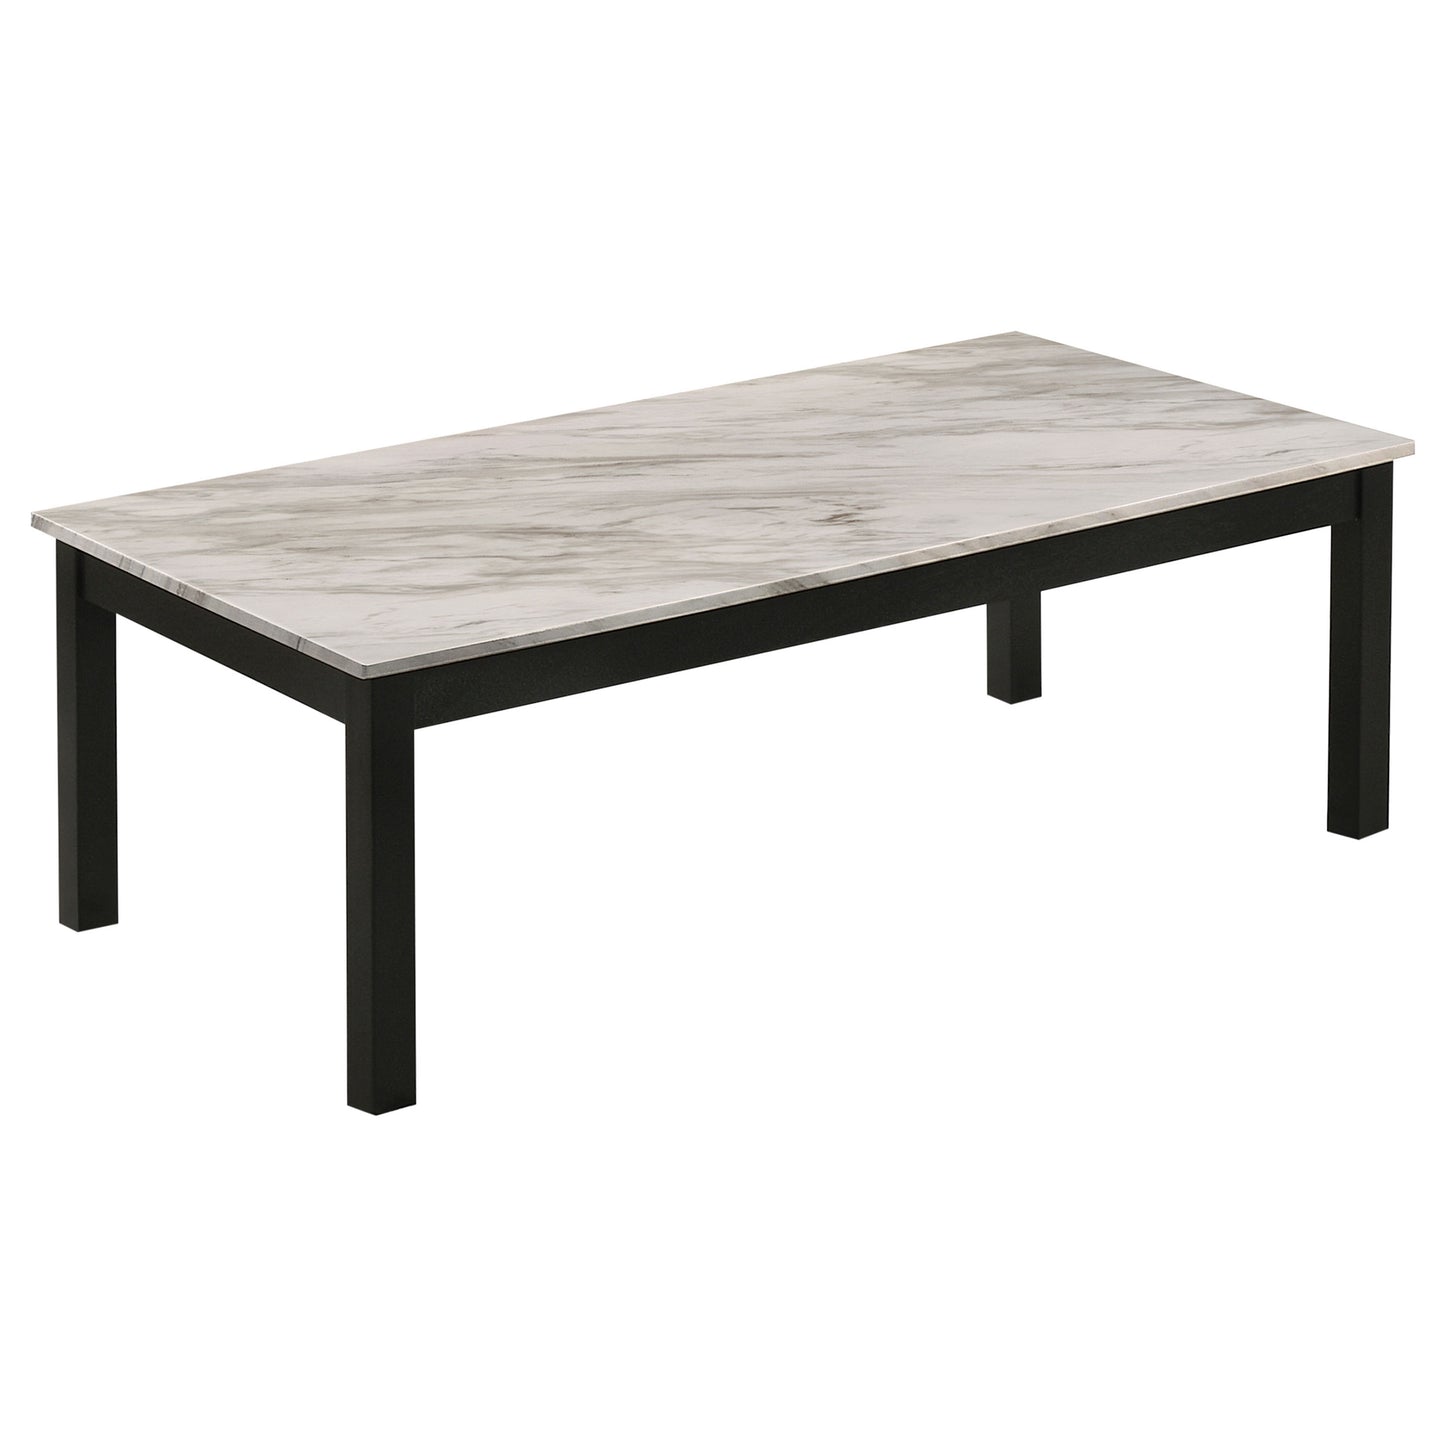 Bates 3-piece Faux Marble Top Coffee Table Set White